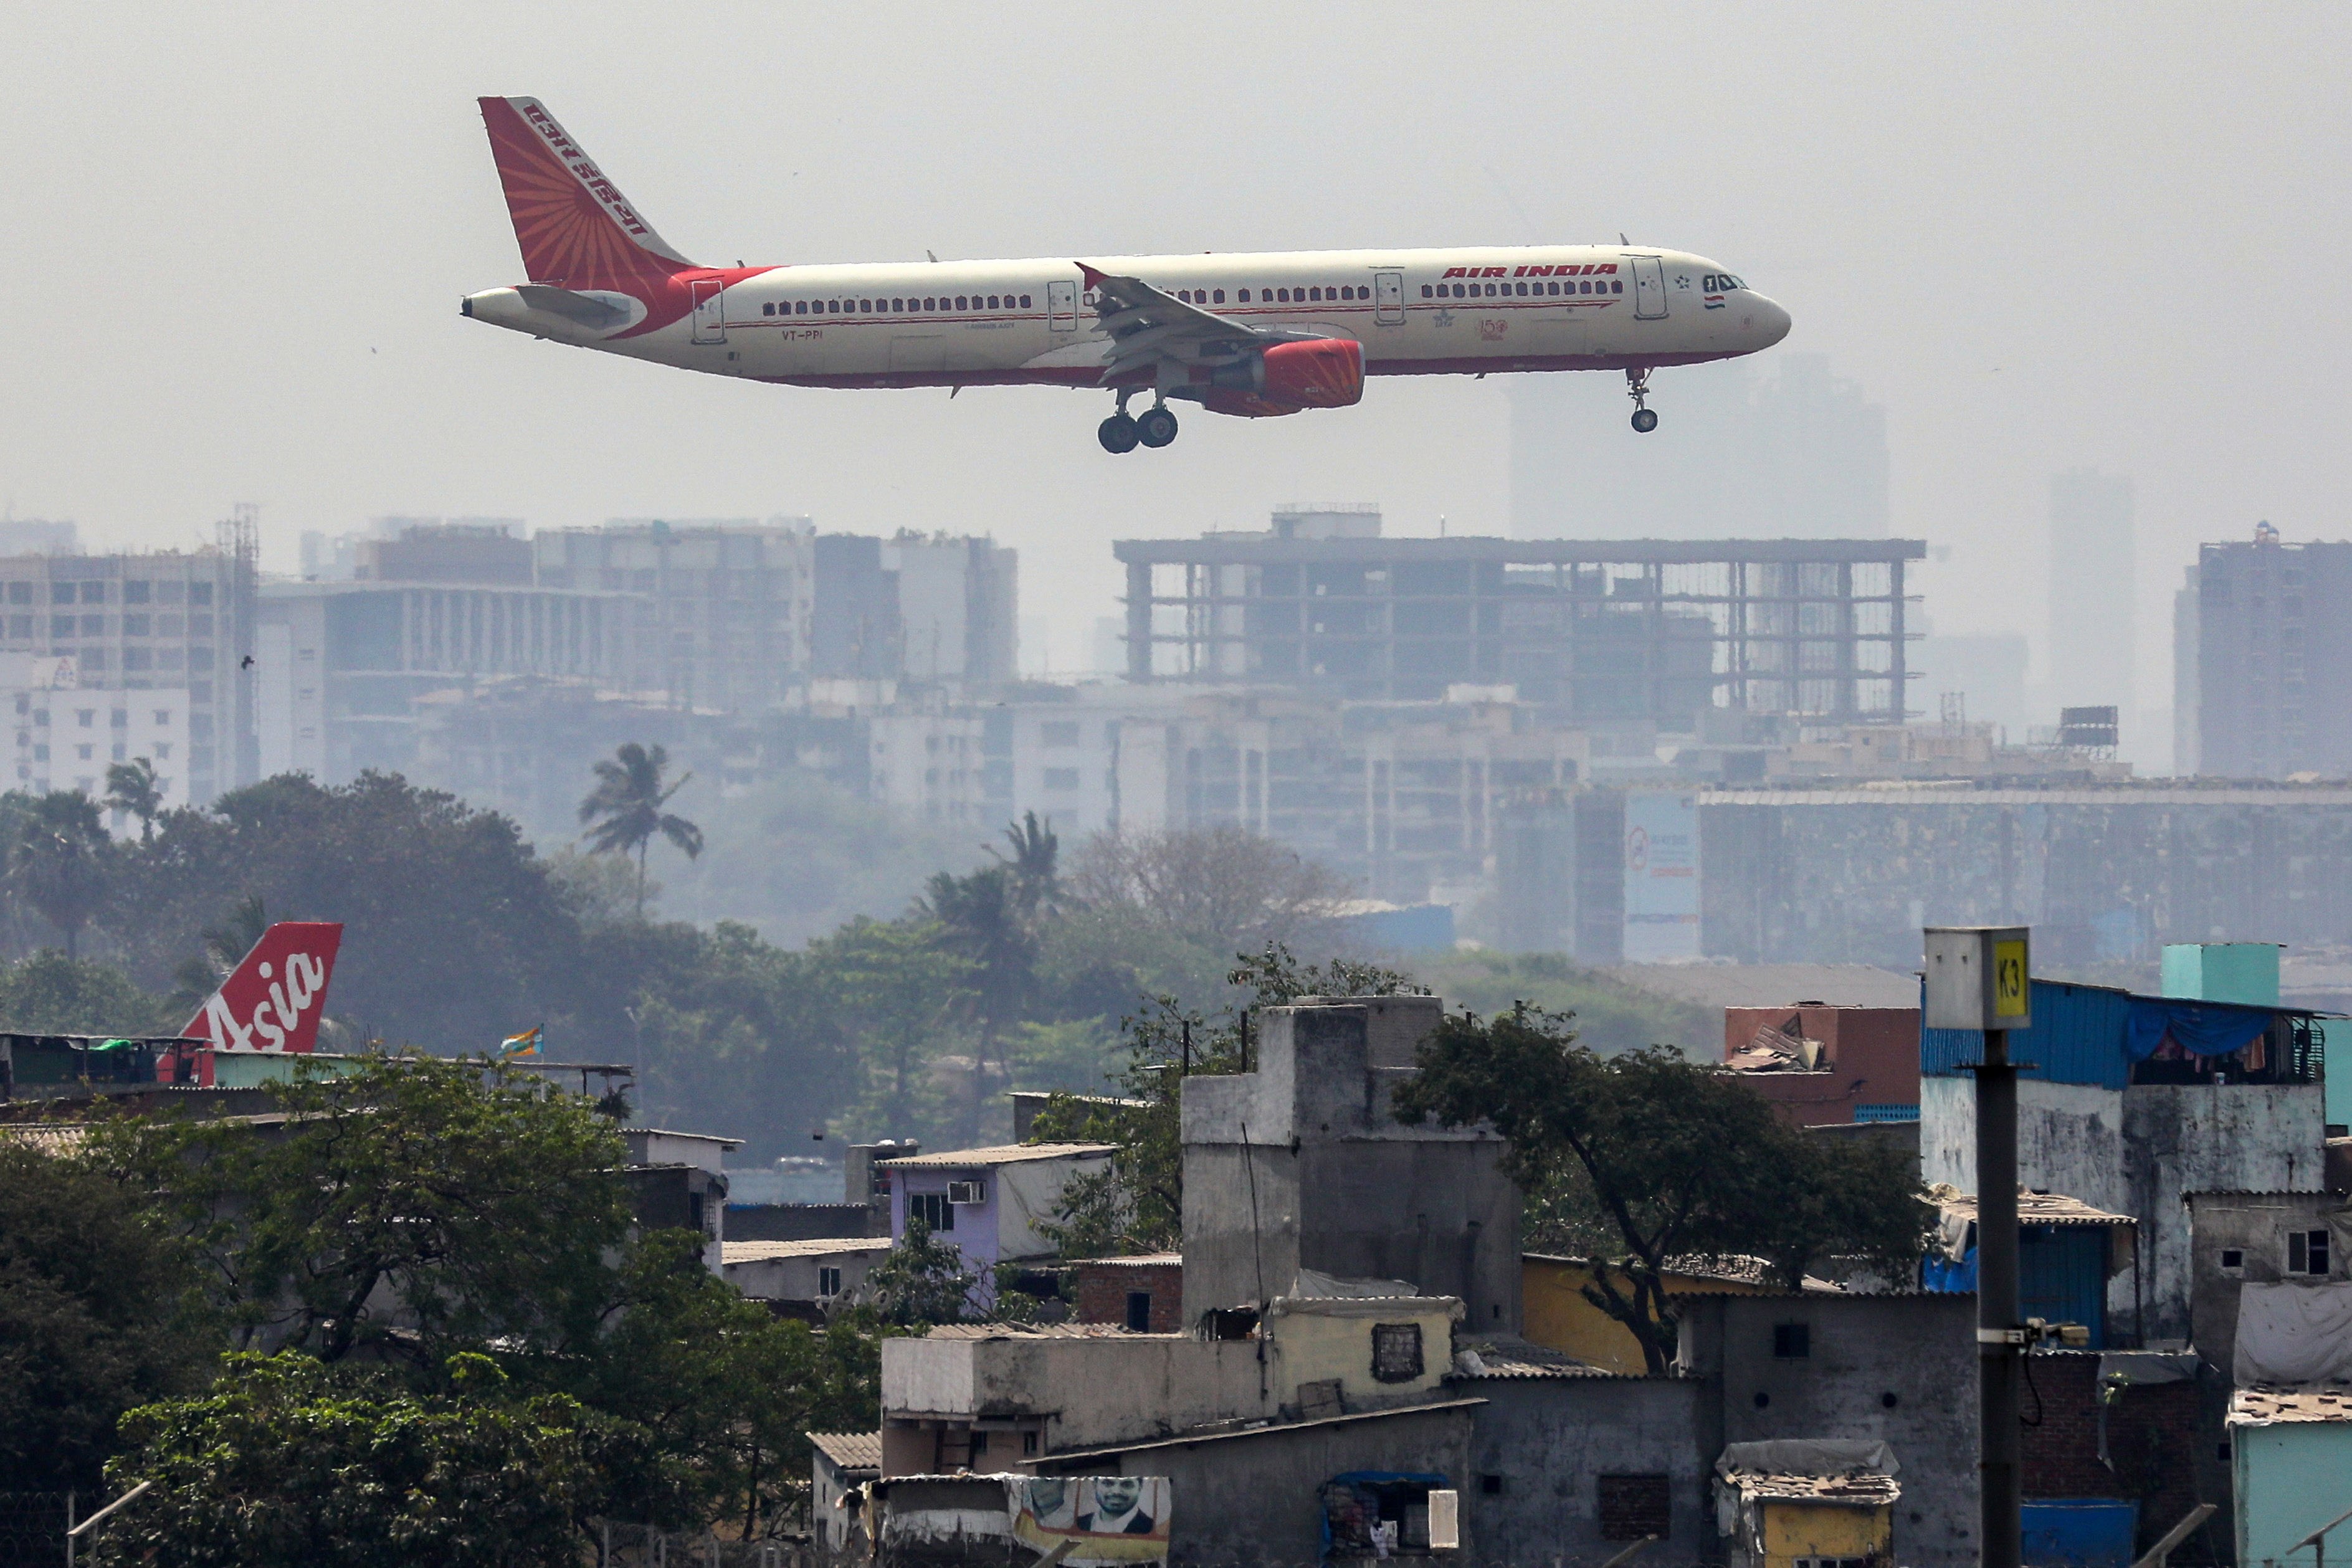 An Air India passenger plane comes in to land at an airport in Mumbai last month. Photo: EPA-EFE